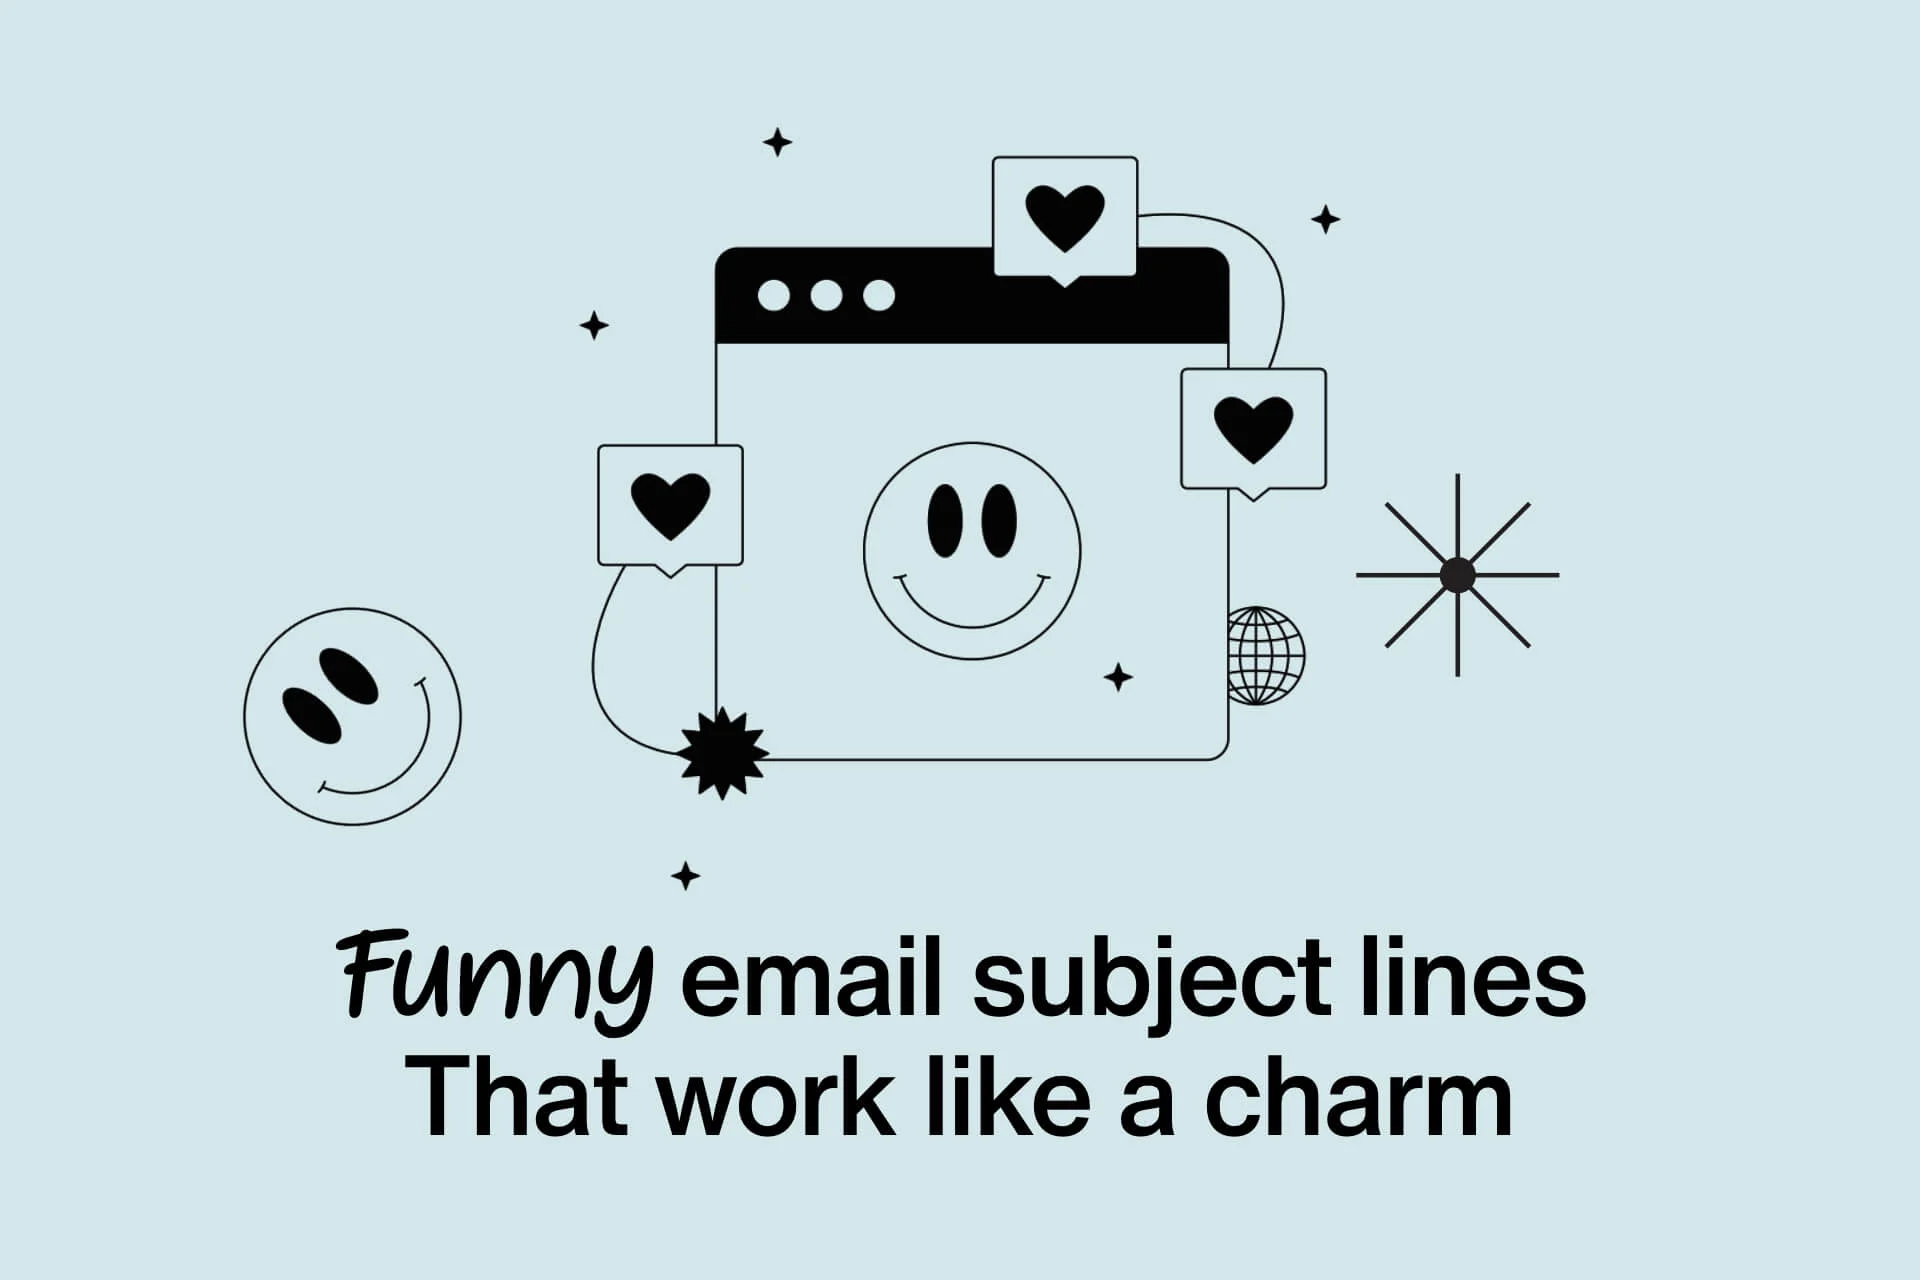 10 Funny Email Subject Lines That Work Like a Charm